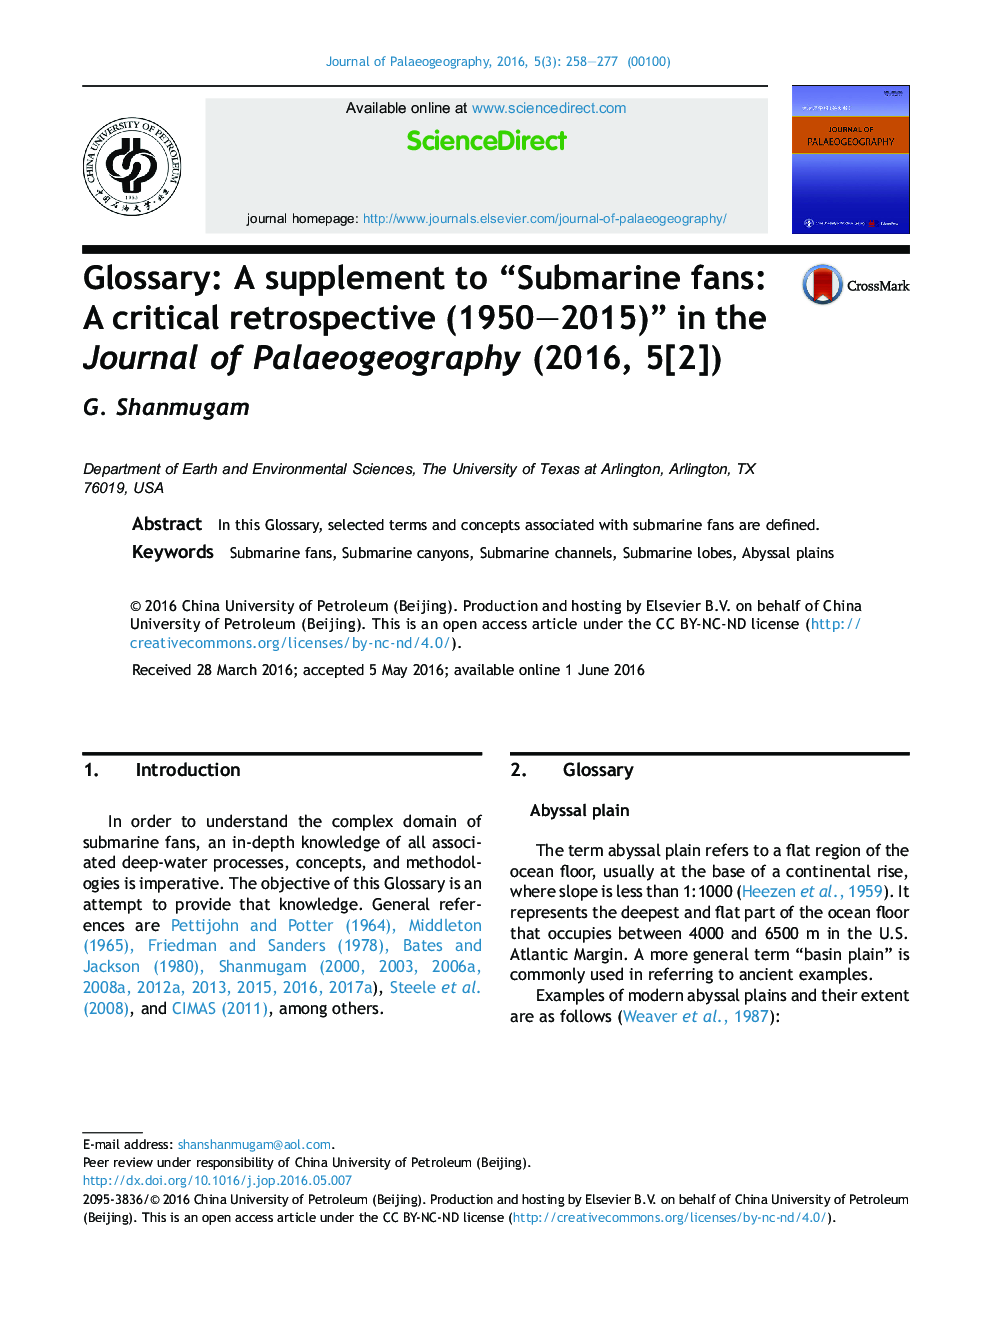 Glossary: A supplement to “Submarine fans: A critical retrospective (1950–2015)” in the Journal of Palaeogeography (2016, 5[2]) 